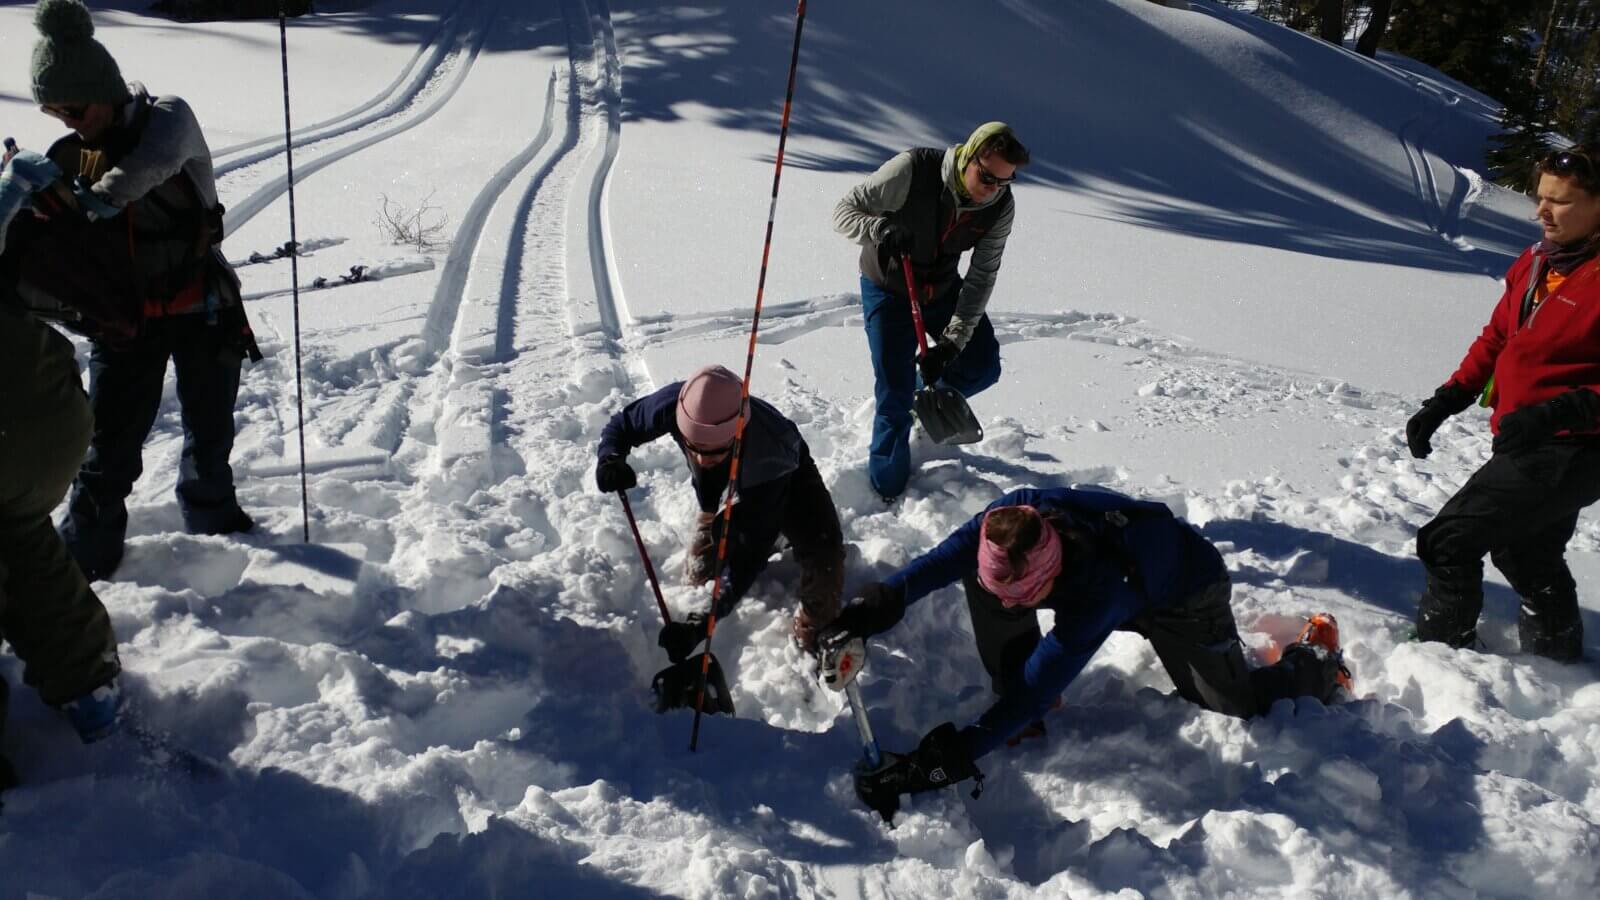 A group practicing avalanche rescue skills in Lake Tahoe